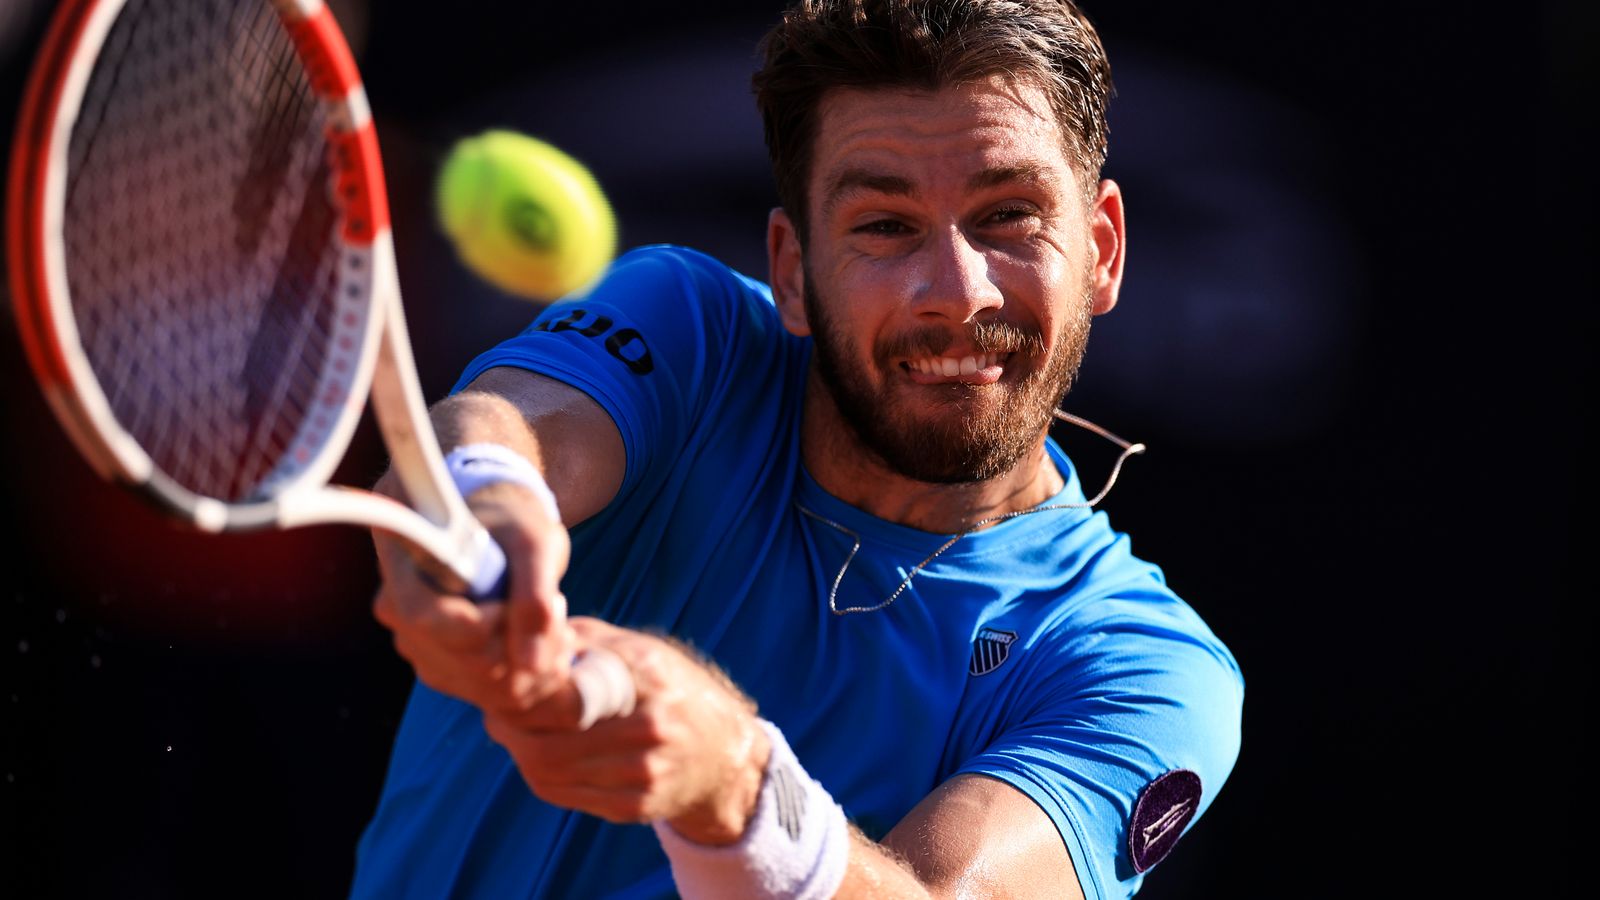 Cameron Norrie to play Carlos Alcaraz in Rio Open final after battling past Bernabe Zapata Miralles Tennis News Sky Sports